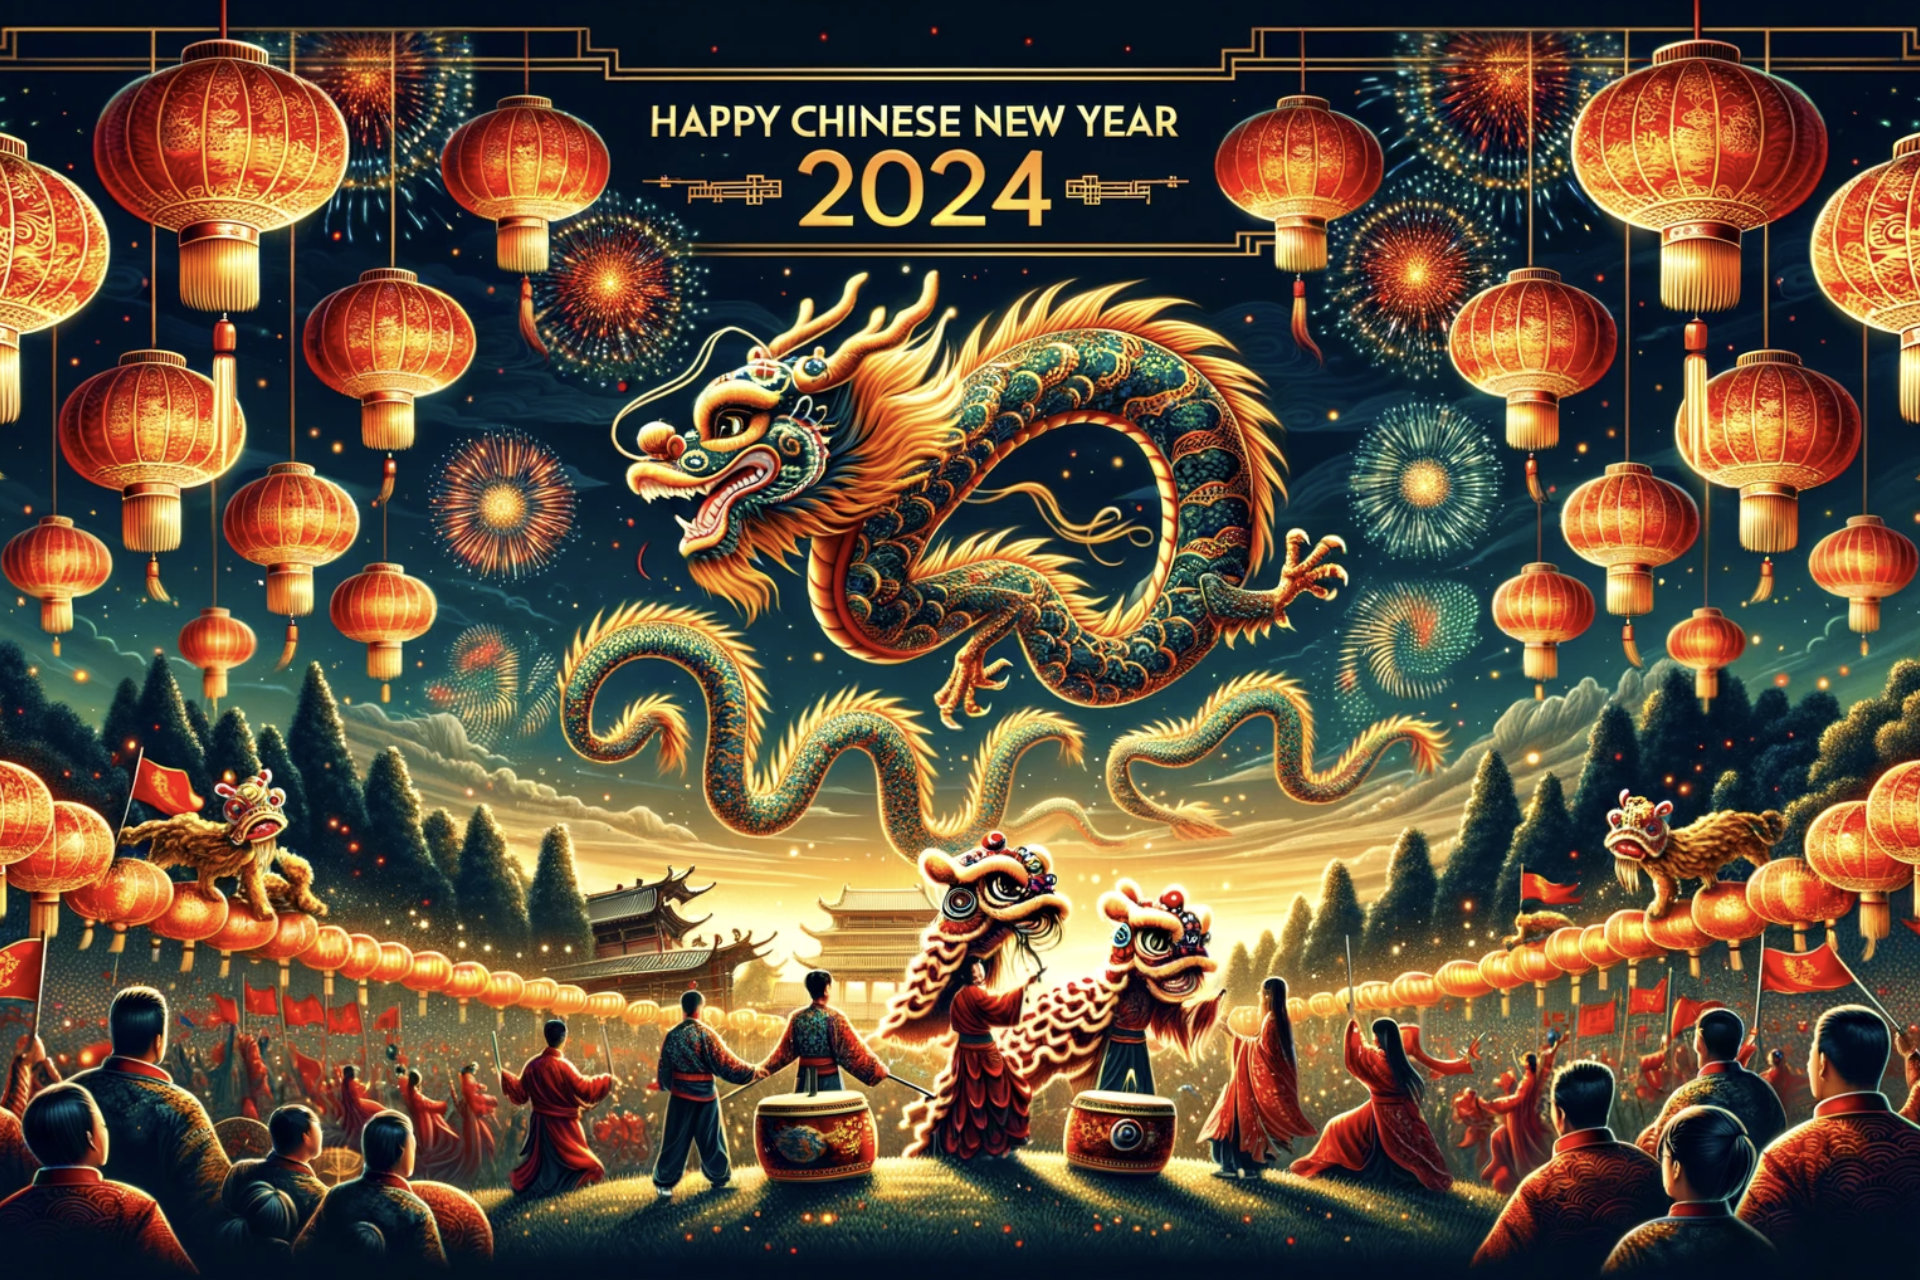 Happy Chinese New Year 2024: Best CNY Greetings and Wishes